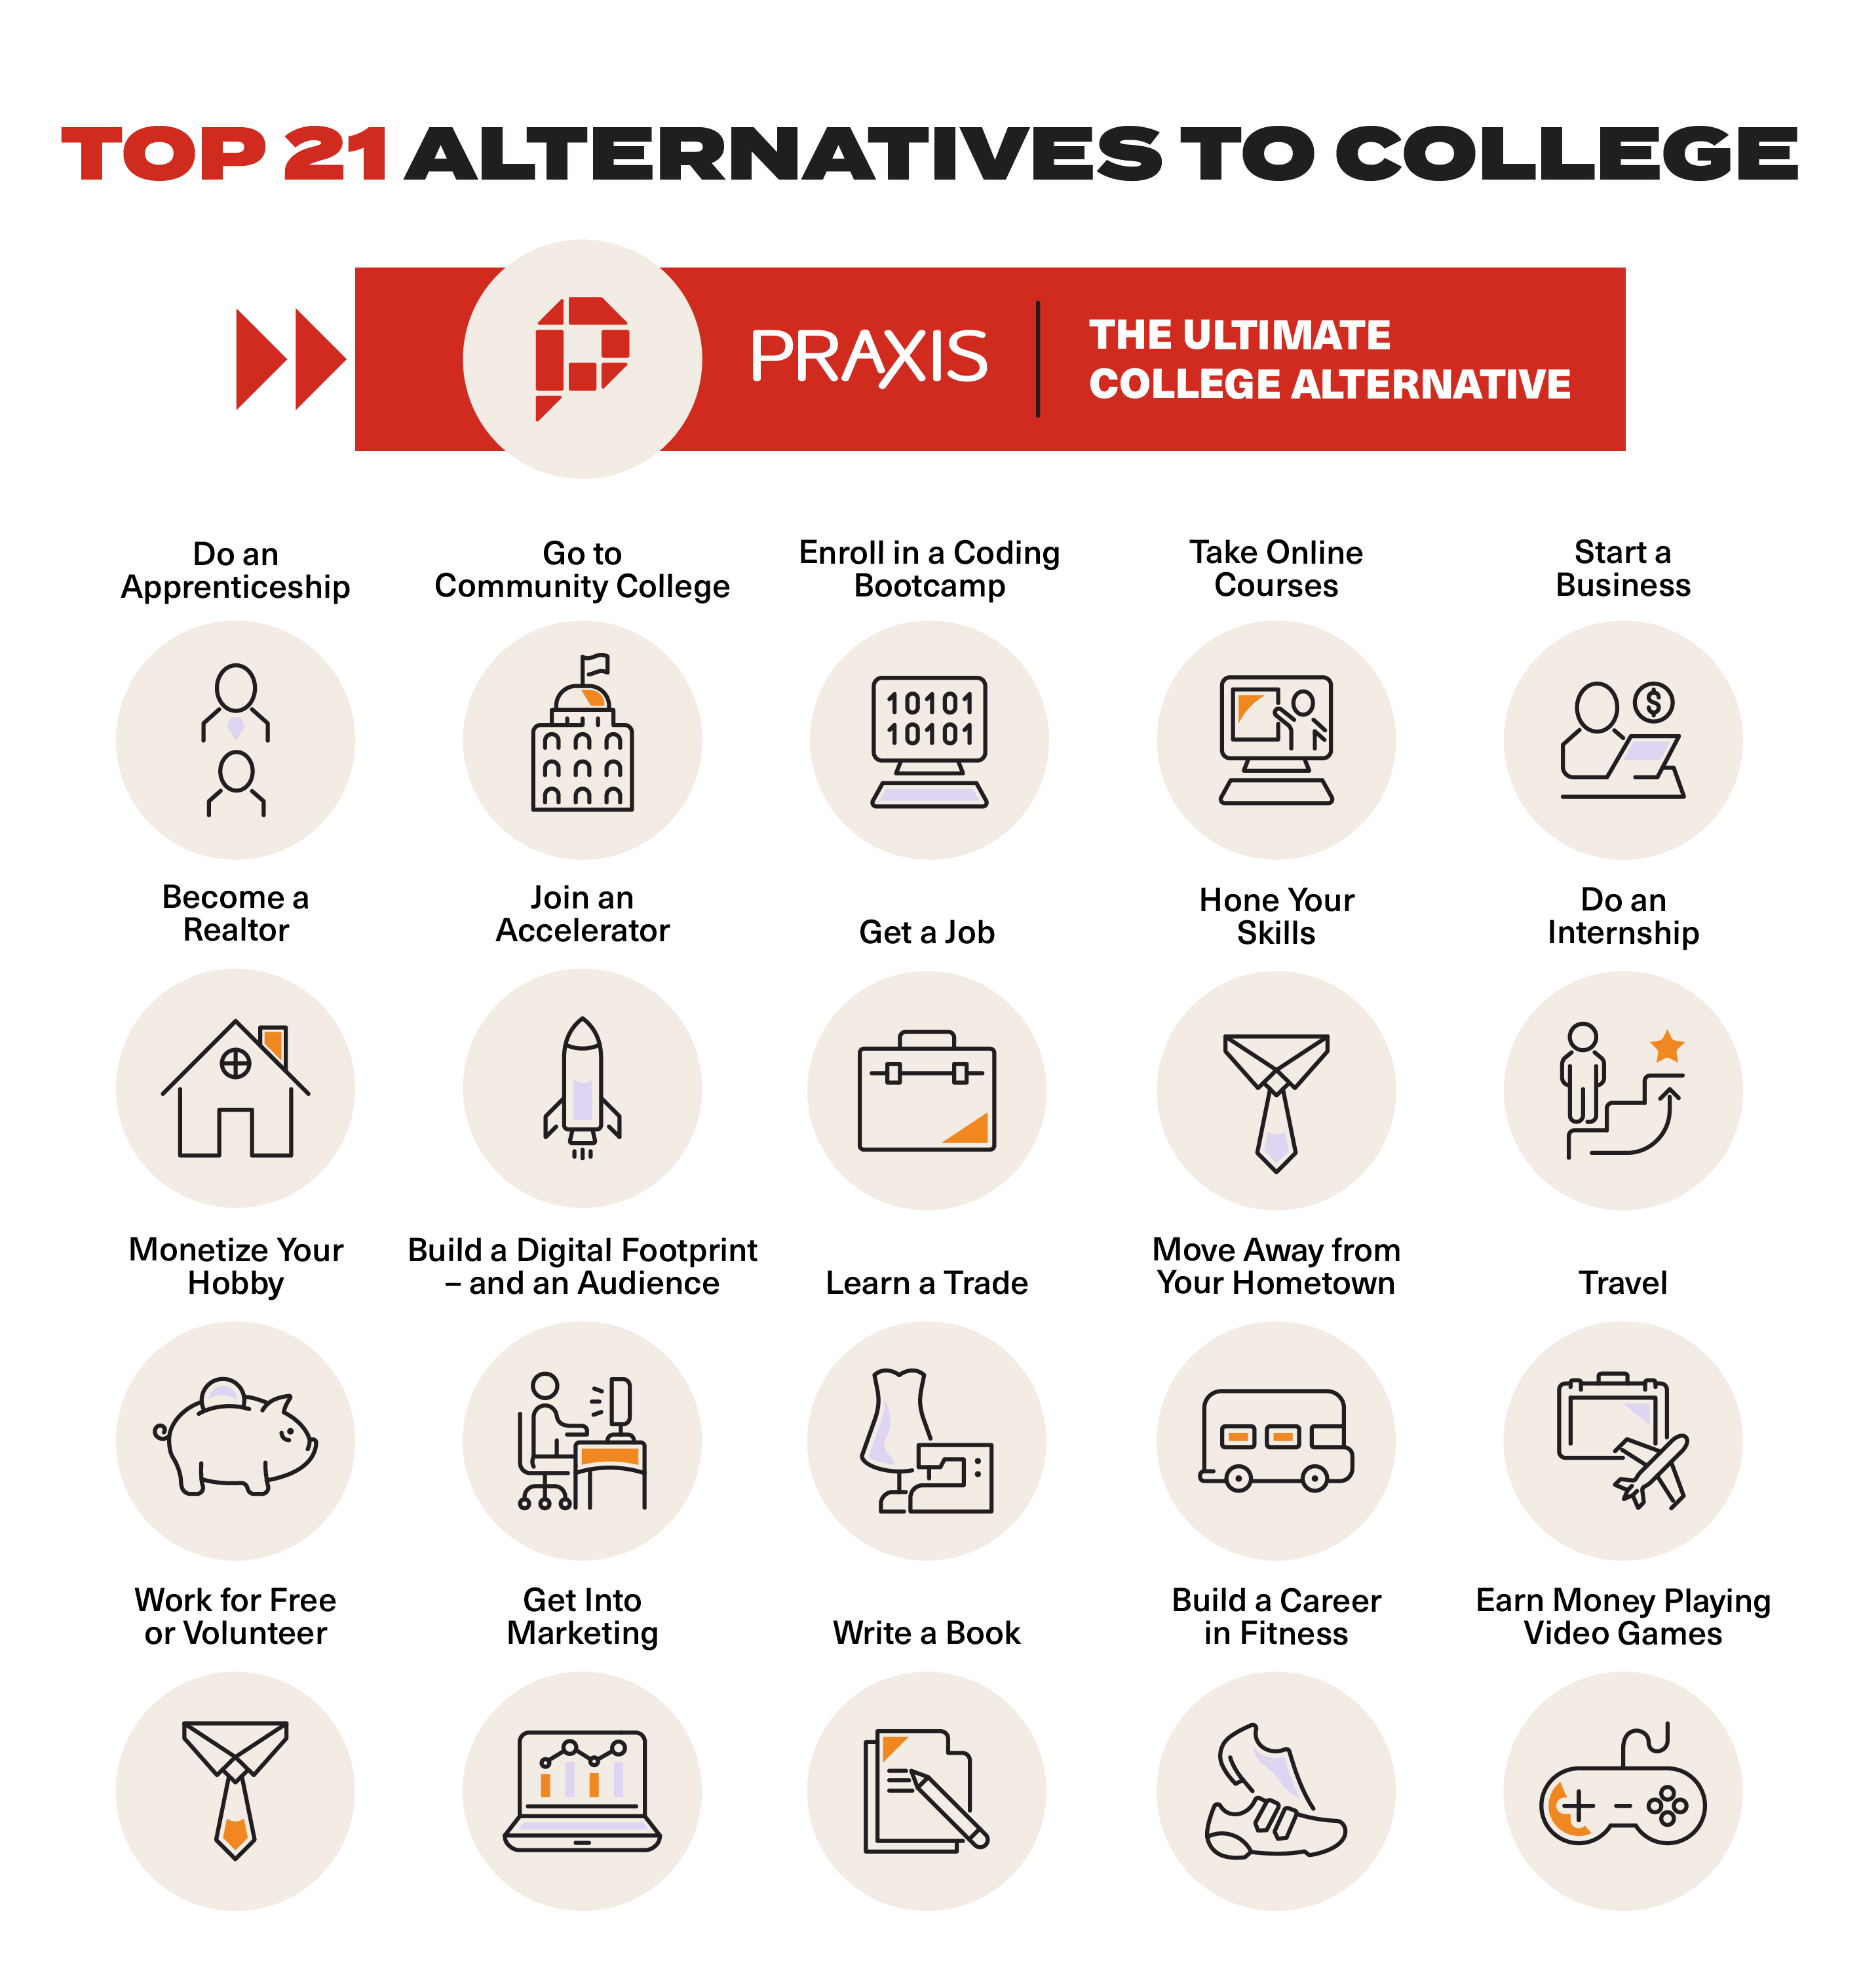 21 Top Alternatives to College for 2021